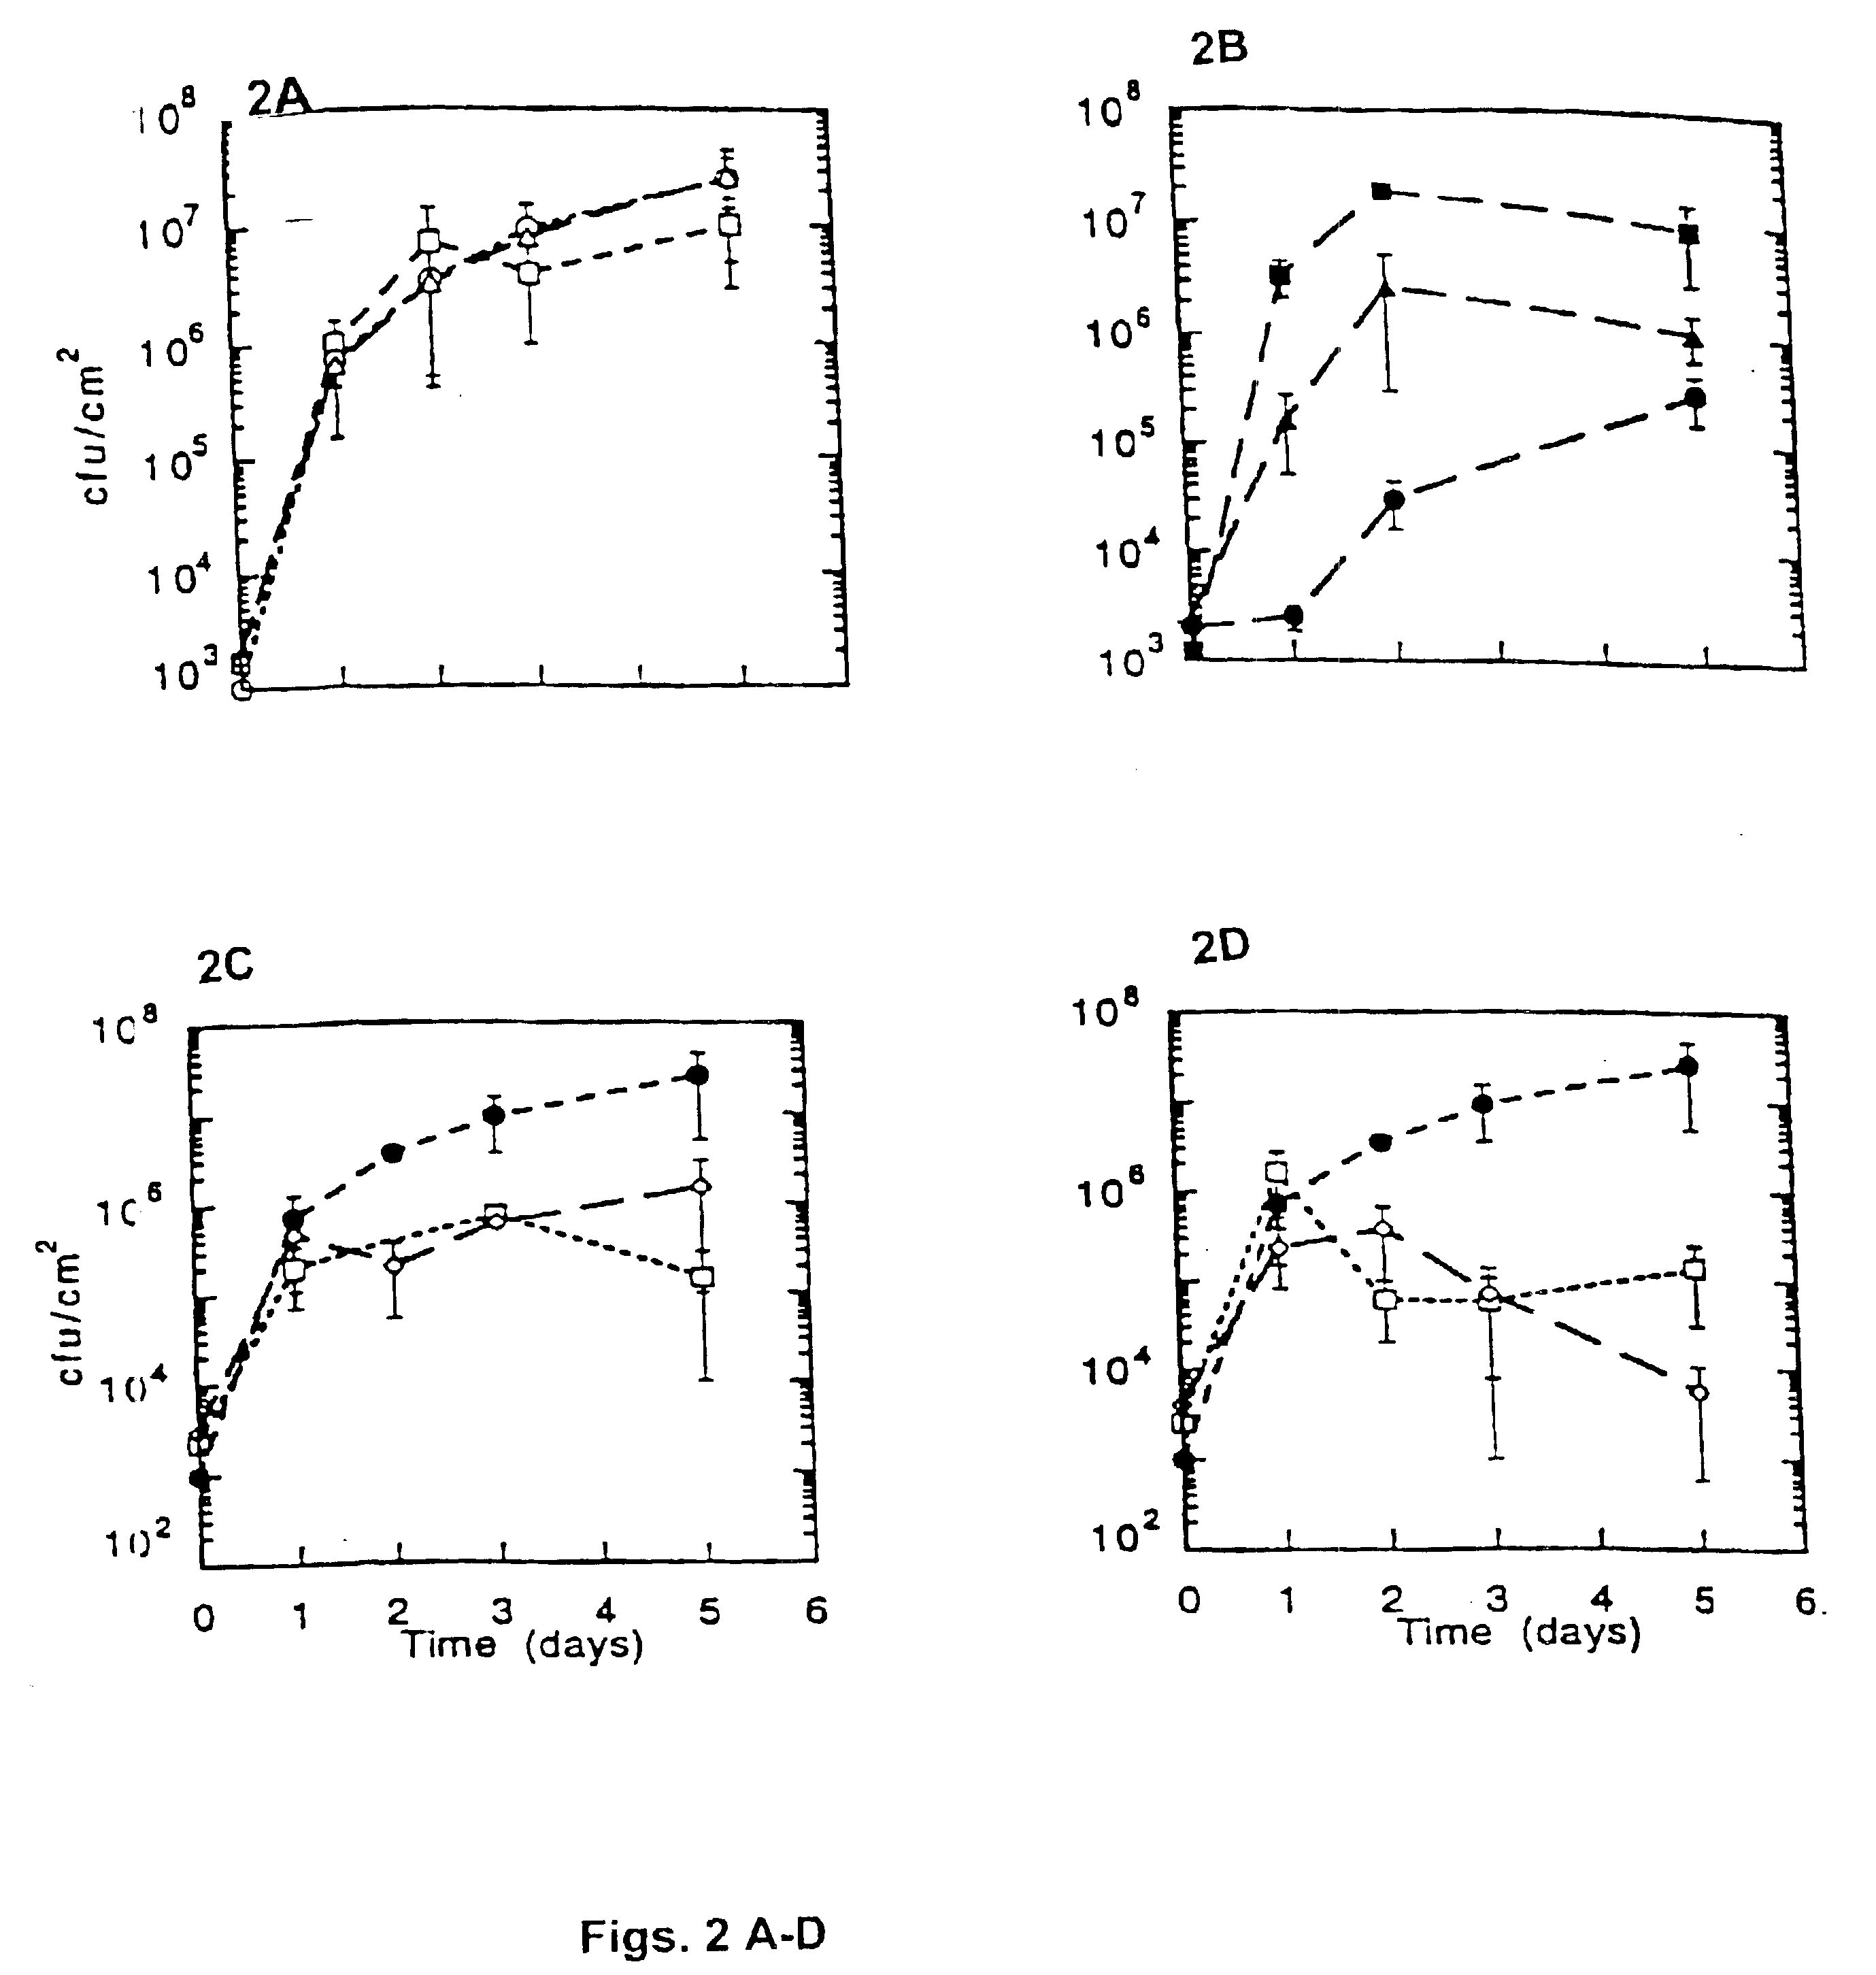 Methods of screening compounds useful for prevention of infection or pathogenicity